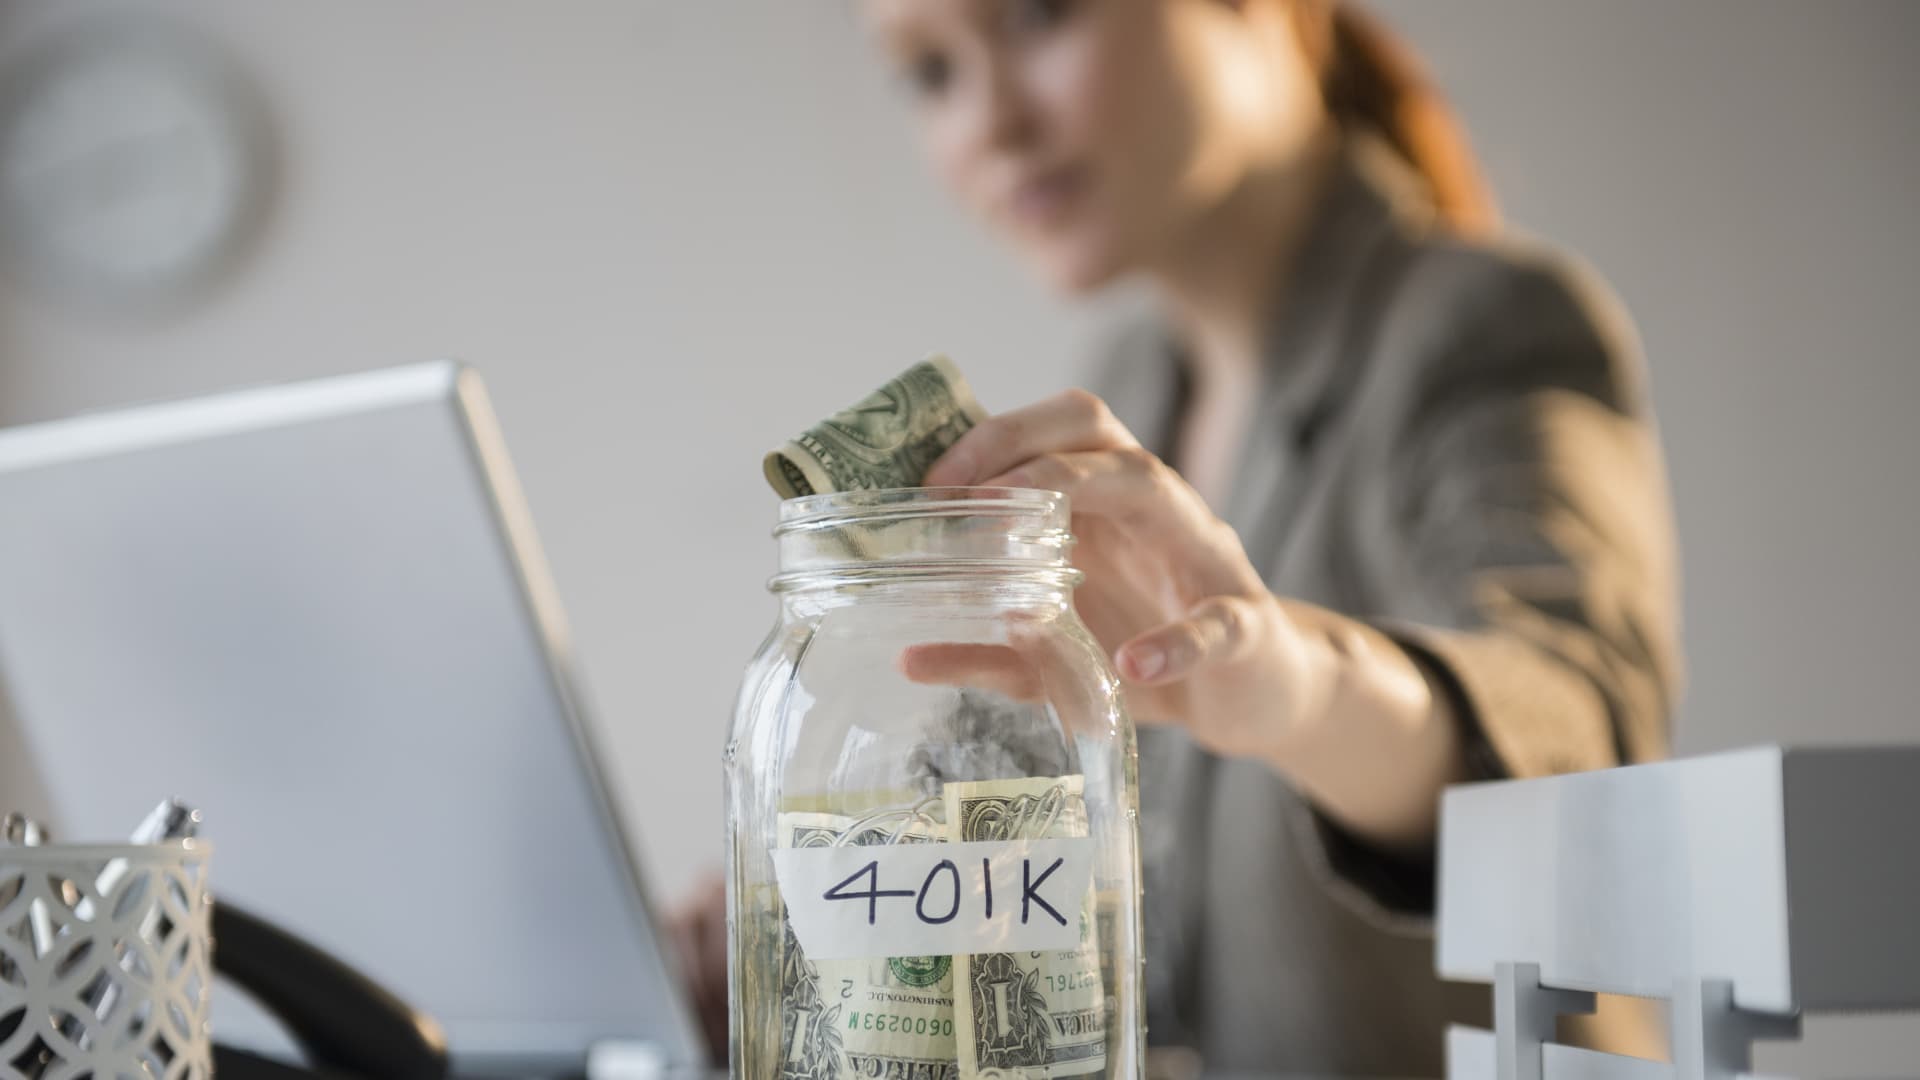 How much of your paycheck do you need to contribute to max out your 401(k) account?